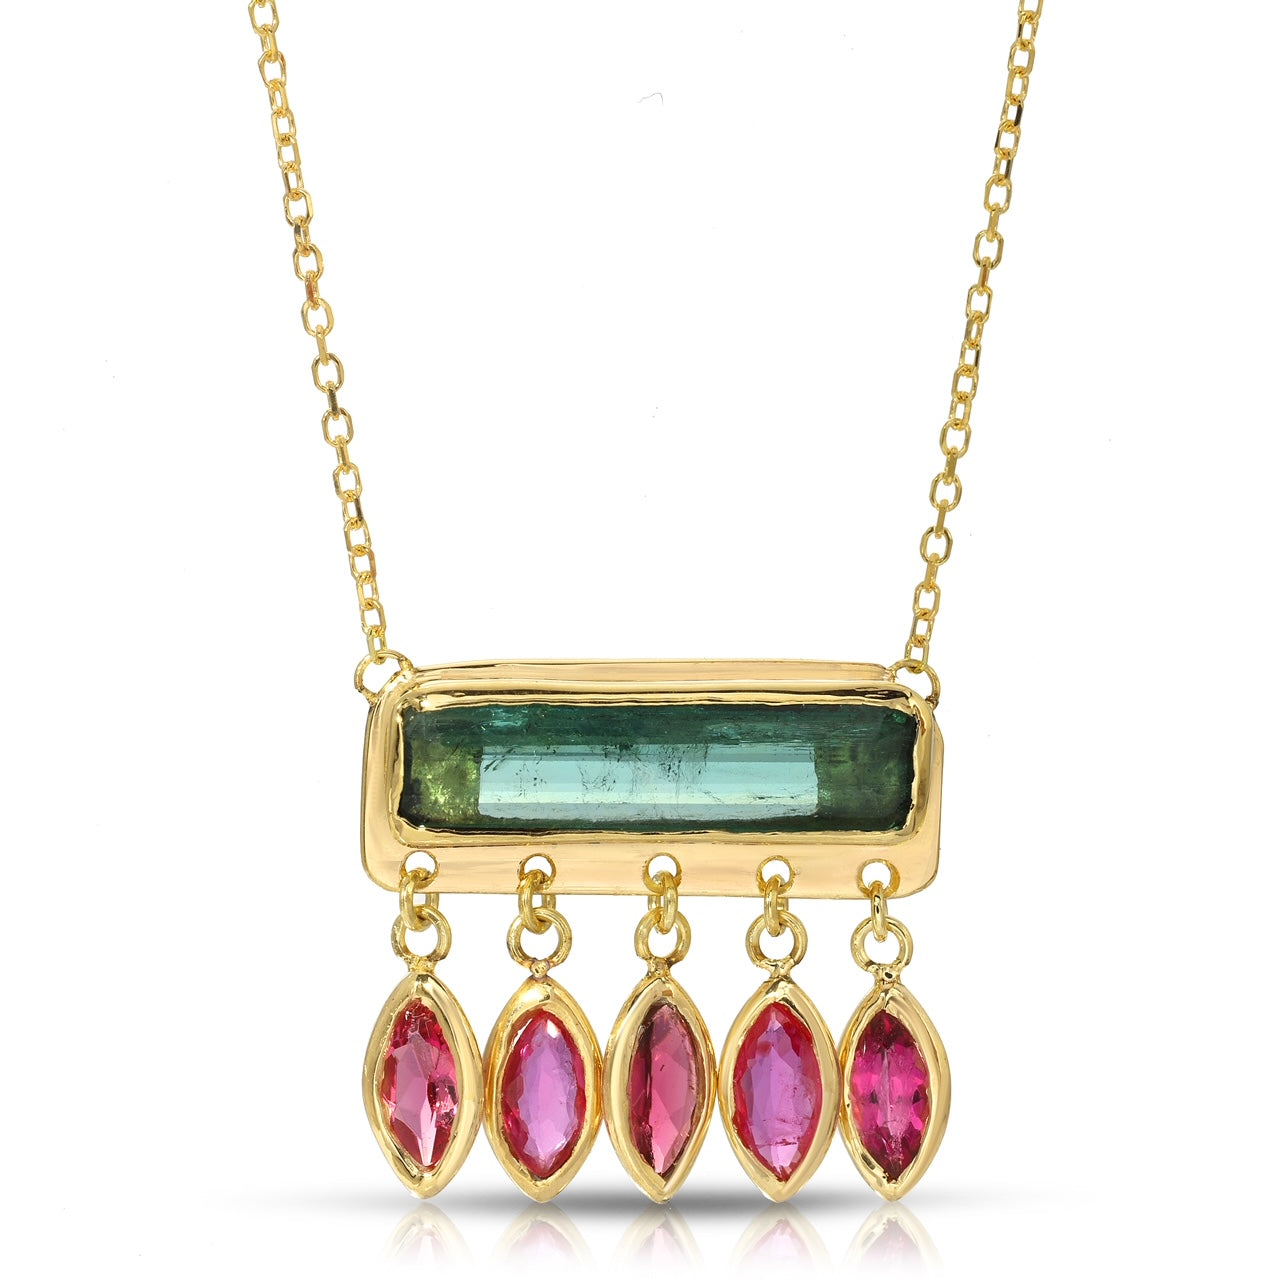 Lumen Necklace in Blue Tourmaline and Rubies